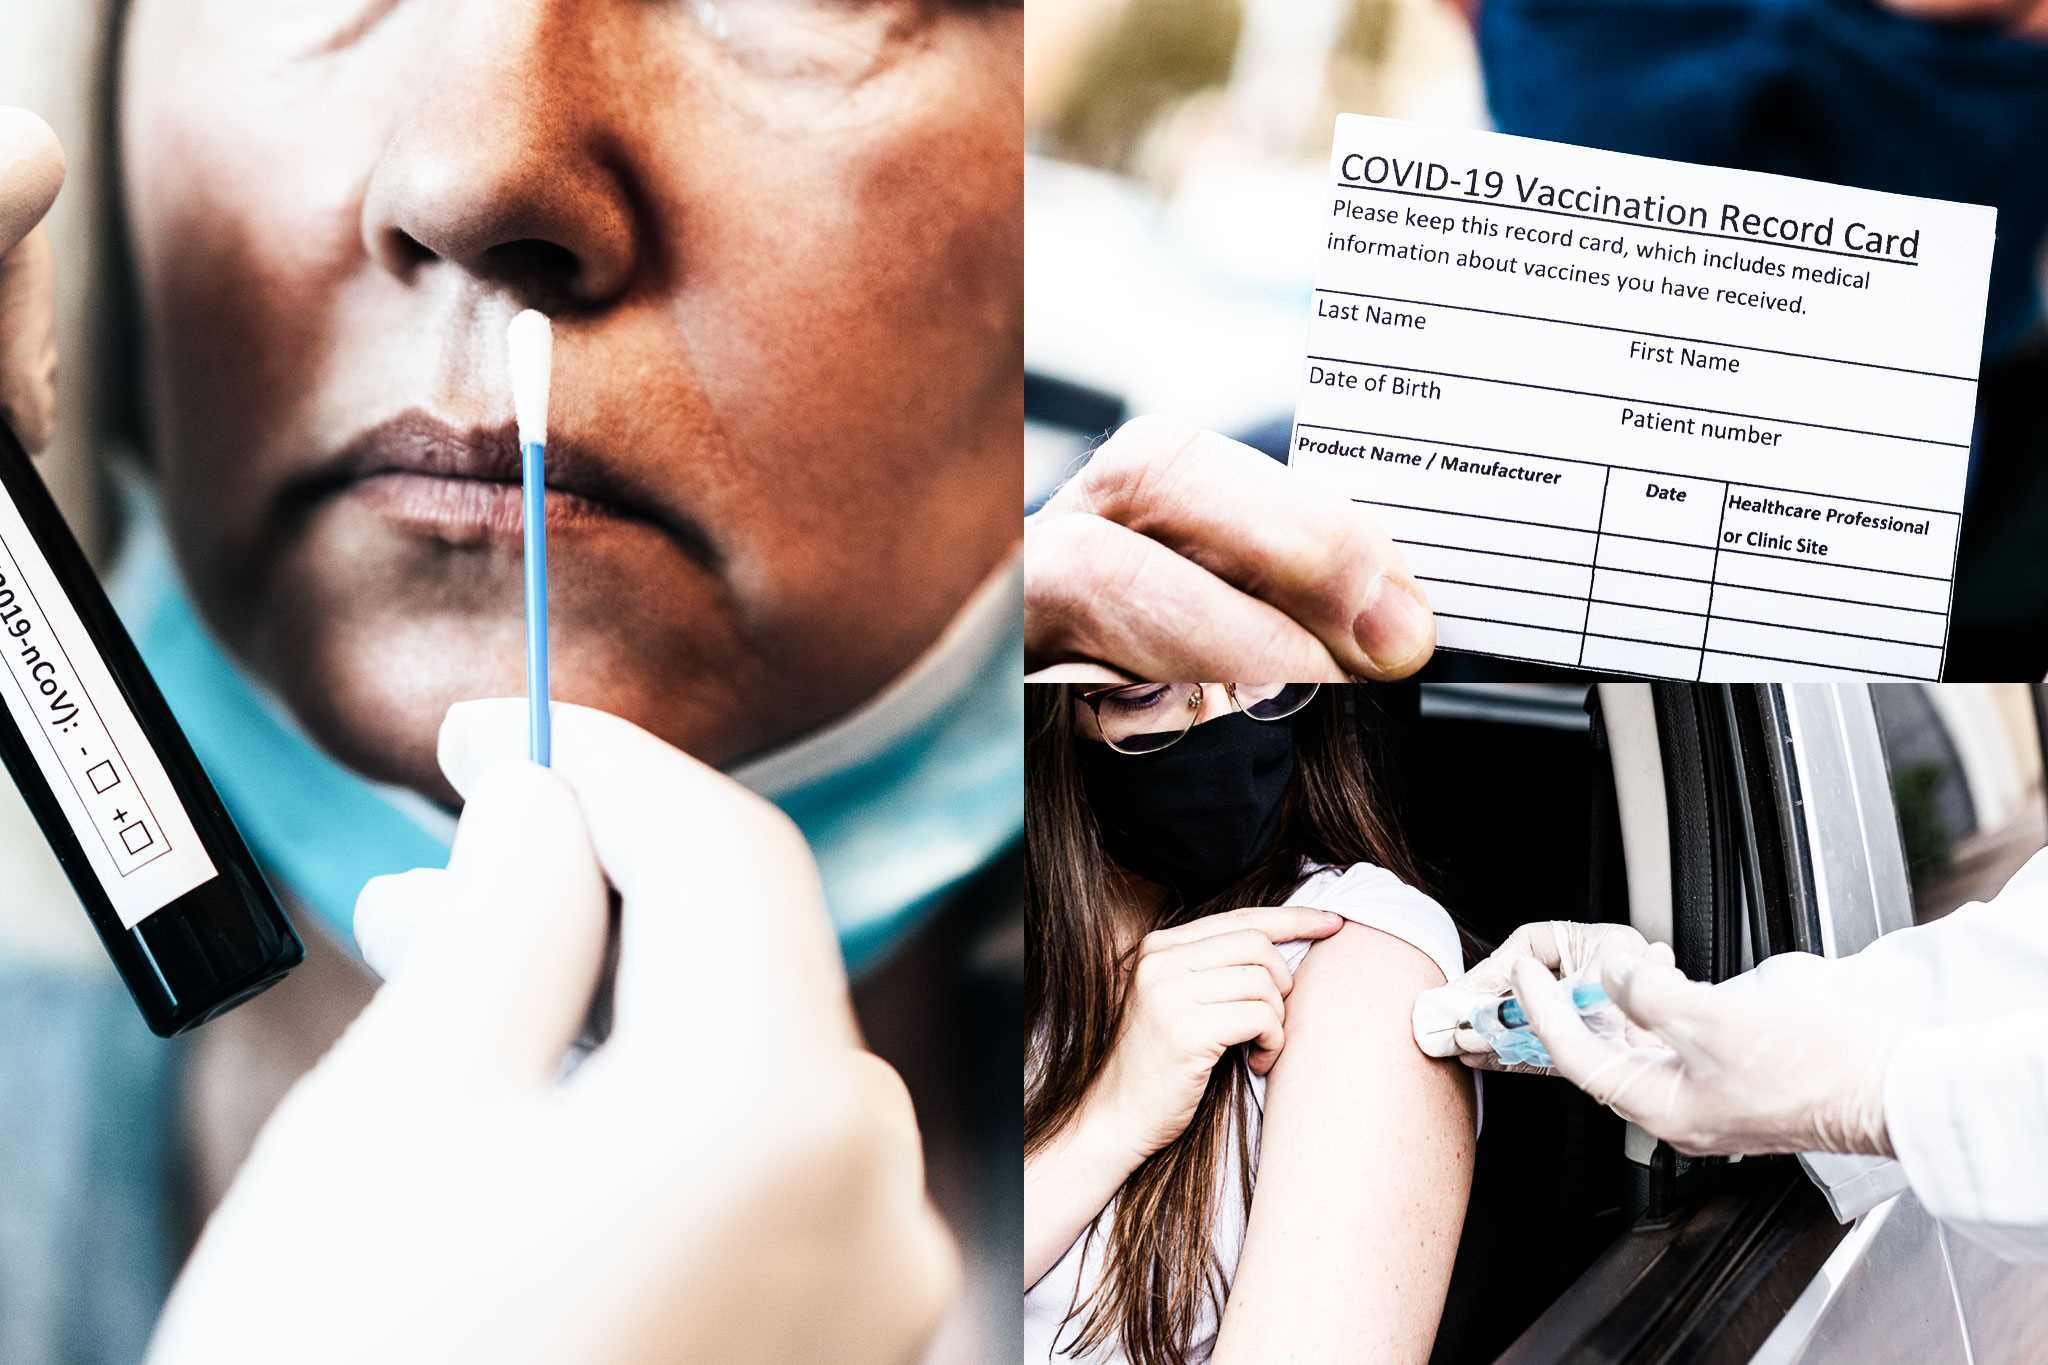 Woman getting COVID-19 nasal swab test & image of COVID-19 Vaccination Record Card